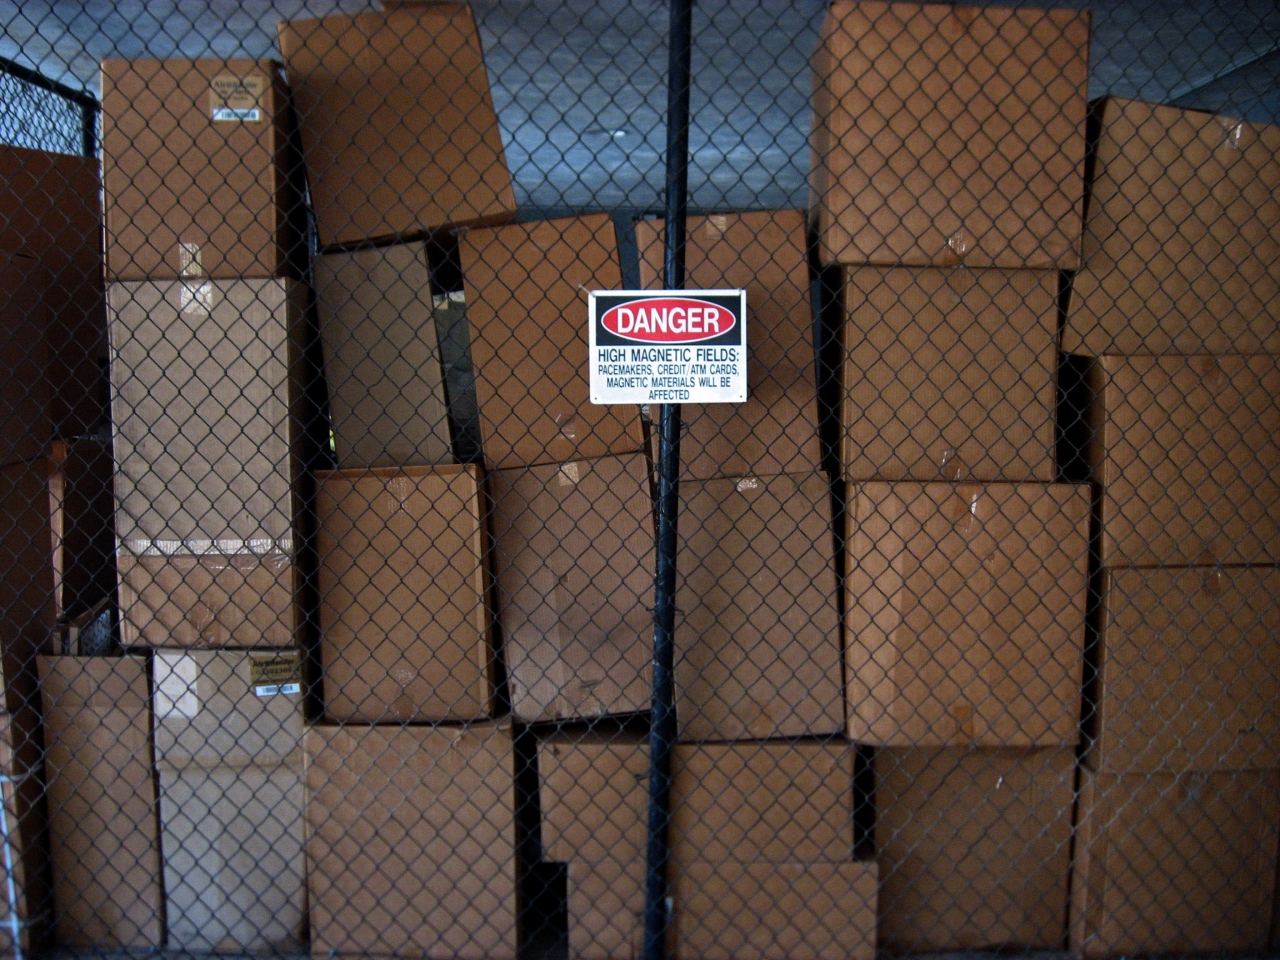 Cardboard boxes, black fence and 'Danger High Magnetic Fields' sign.